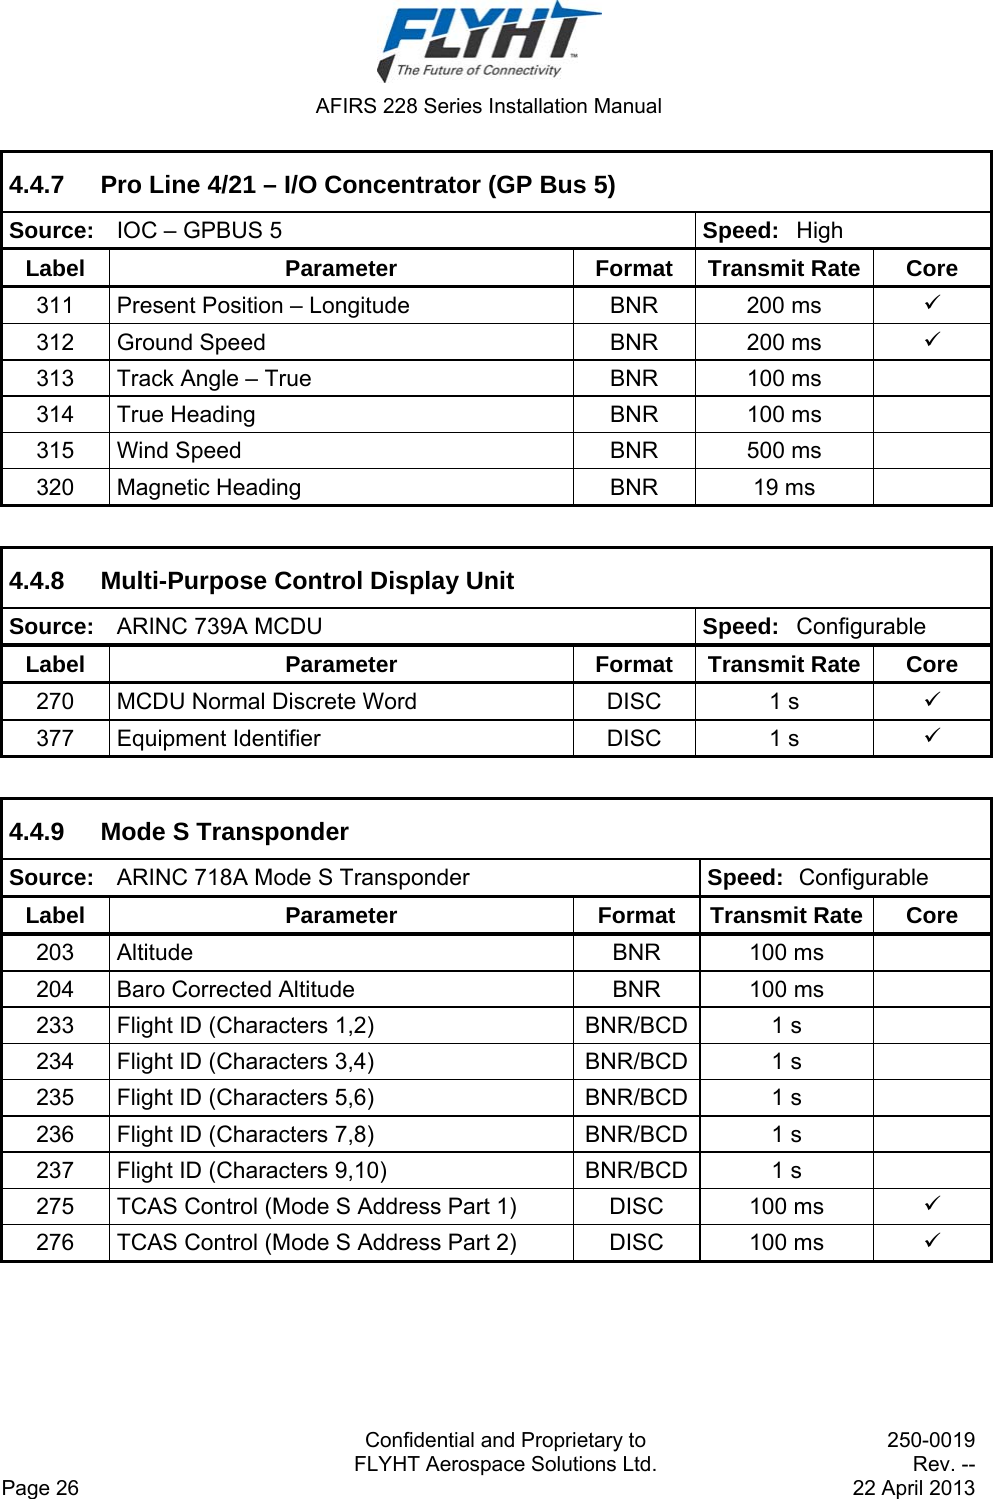  AFIRS 228 Series Installation Manual   Confidential and Proprietary to  250-0019   FLYHT Aerospace Solutions Ltd.  Rev. -- Page 26    22 April 2013 4.4.7  Pro Line 4/21 – I/O Concentrator (GP Bus 5) Source:  IOC – GPBUS 5  Speed: High Label Parameter Format Transmit Rate Core 311  Present Position – Longitude  BNR  200 ms   312  Ground Speed  BNR  200 ms   313  Track Angle – True  BNR  100 ms   314  True Heading  BNR  100 ms   315  Wind Speed  BNR  500 ms   320  Magnetic Heading  BNR  19 ms    4.4.8  Multi-Purpose Control Display Unit Source:  ARINC 739A MCDU  Speed: Configurable Label Parameter Format Transmit Rate Core 270  MCDU Normal Discrete Word  DISC  1 s   377  Equipment Identifier  DISC  1 s    4.4.9  Mode S Transponder Source:  ARINC 718A Mode S Transponder  Speed:  Configurable Label Parameter Format Transmit Rate Core 203 Altitude  BNR  100 ms   204  Baro Corrected Altitude  BNR  100 ms   233  Flight ID (Characters 1,2)  BNR/BCD 1 s   234  Flight ID (Characters 3,4)  BNR/BCD 1 s   235  Flight ID (Characters 5,6)  BNR/BCD 1 s   236  Flight ID (Characters 7,8)  BNR/BCD 1 s   237  Flight ID (Characters 9,10)  BNR/BCD 1 s   275  TCAS Control (Mode S Address Part 1)  DISC  100 ms   276  TCAS Control (Mode S Address Part 2)  DISC  100 ms   